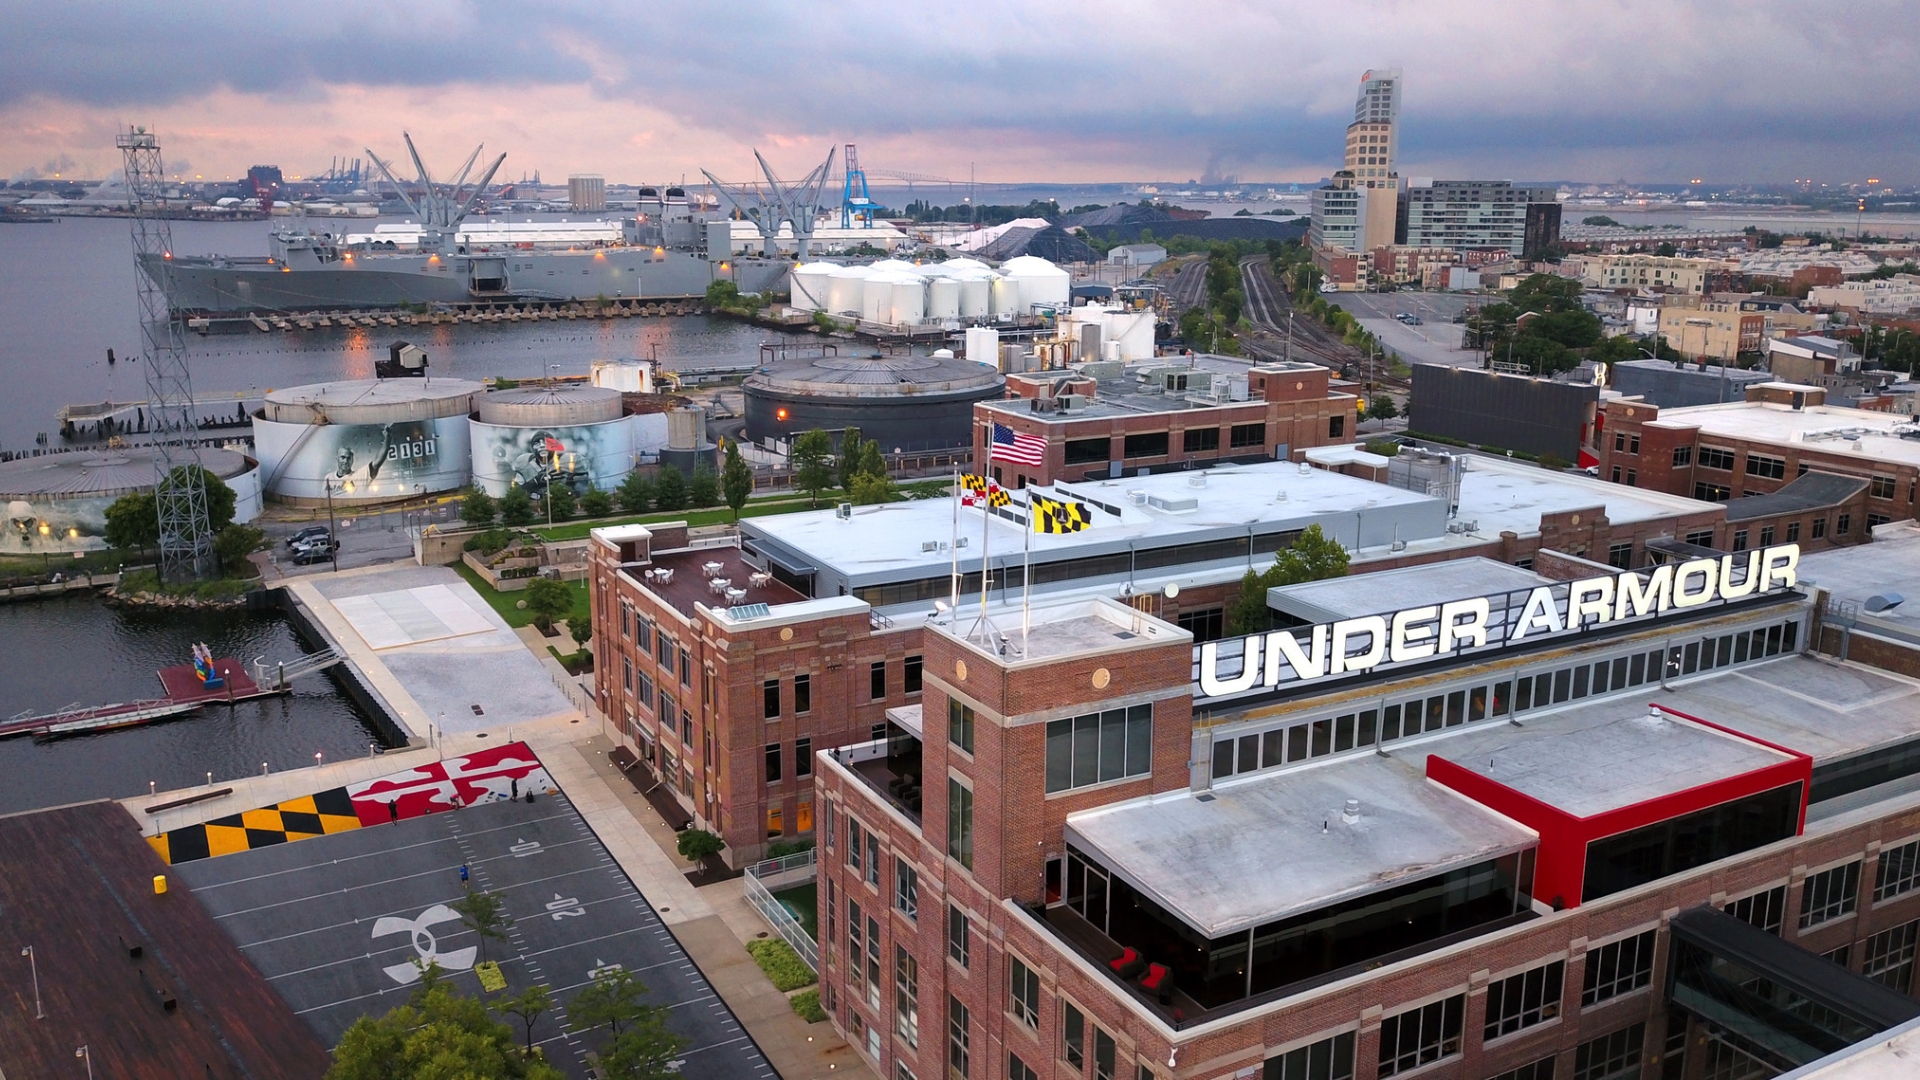 under armour global headquarters